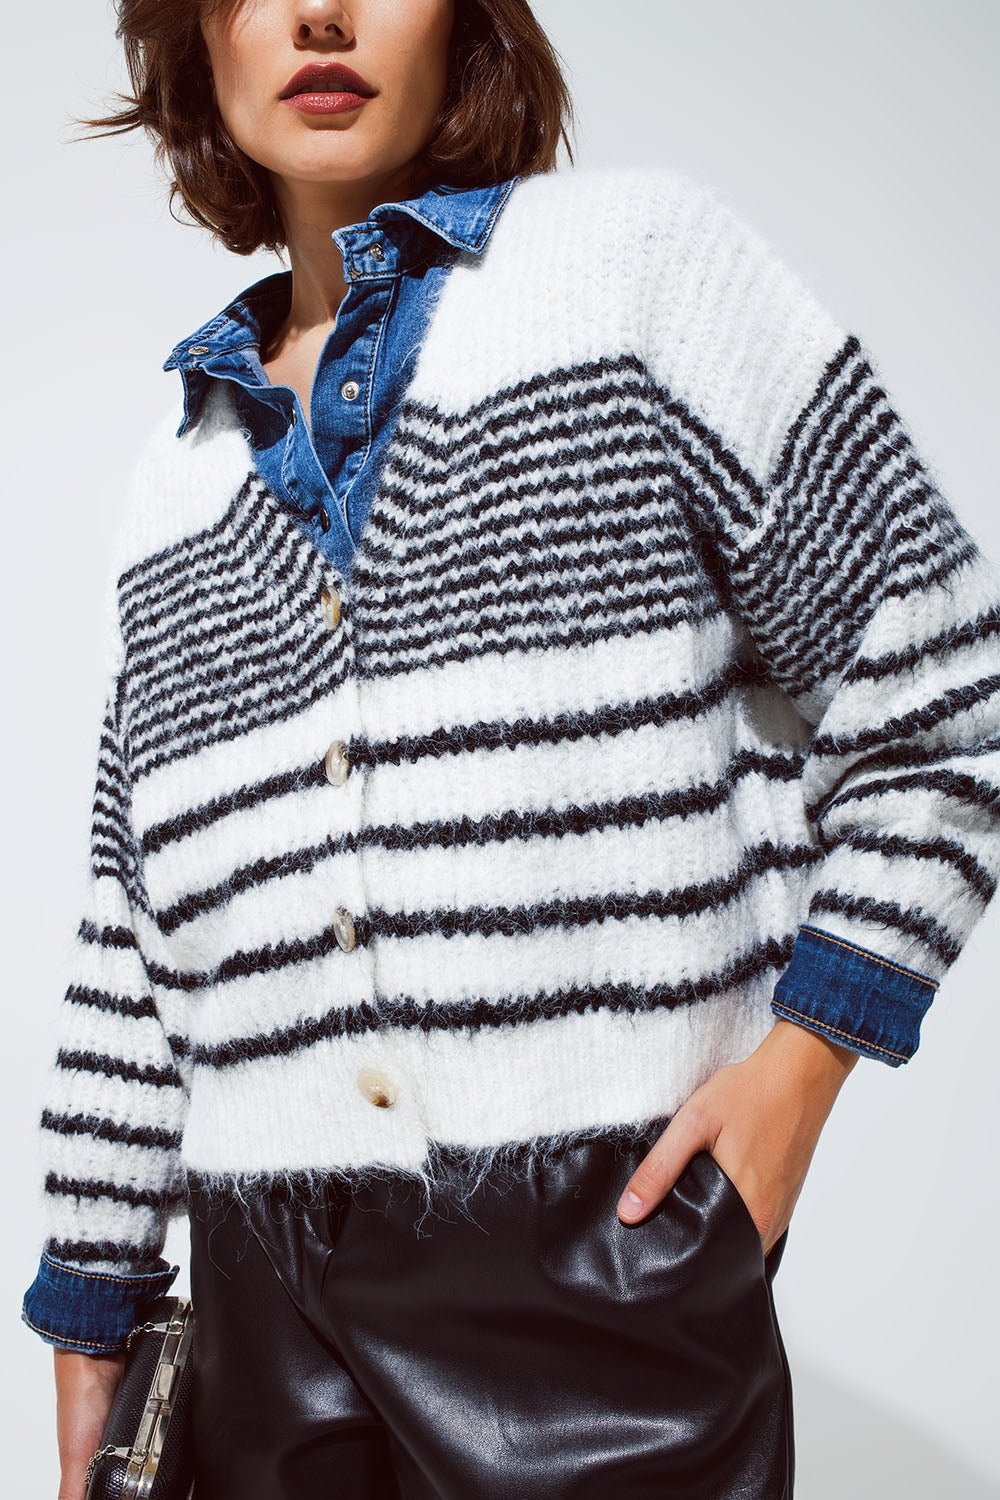 Soft and Fluffy White Cardigan With Black Stripes and Deep v Neck - Mack & Harvie